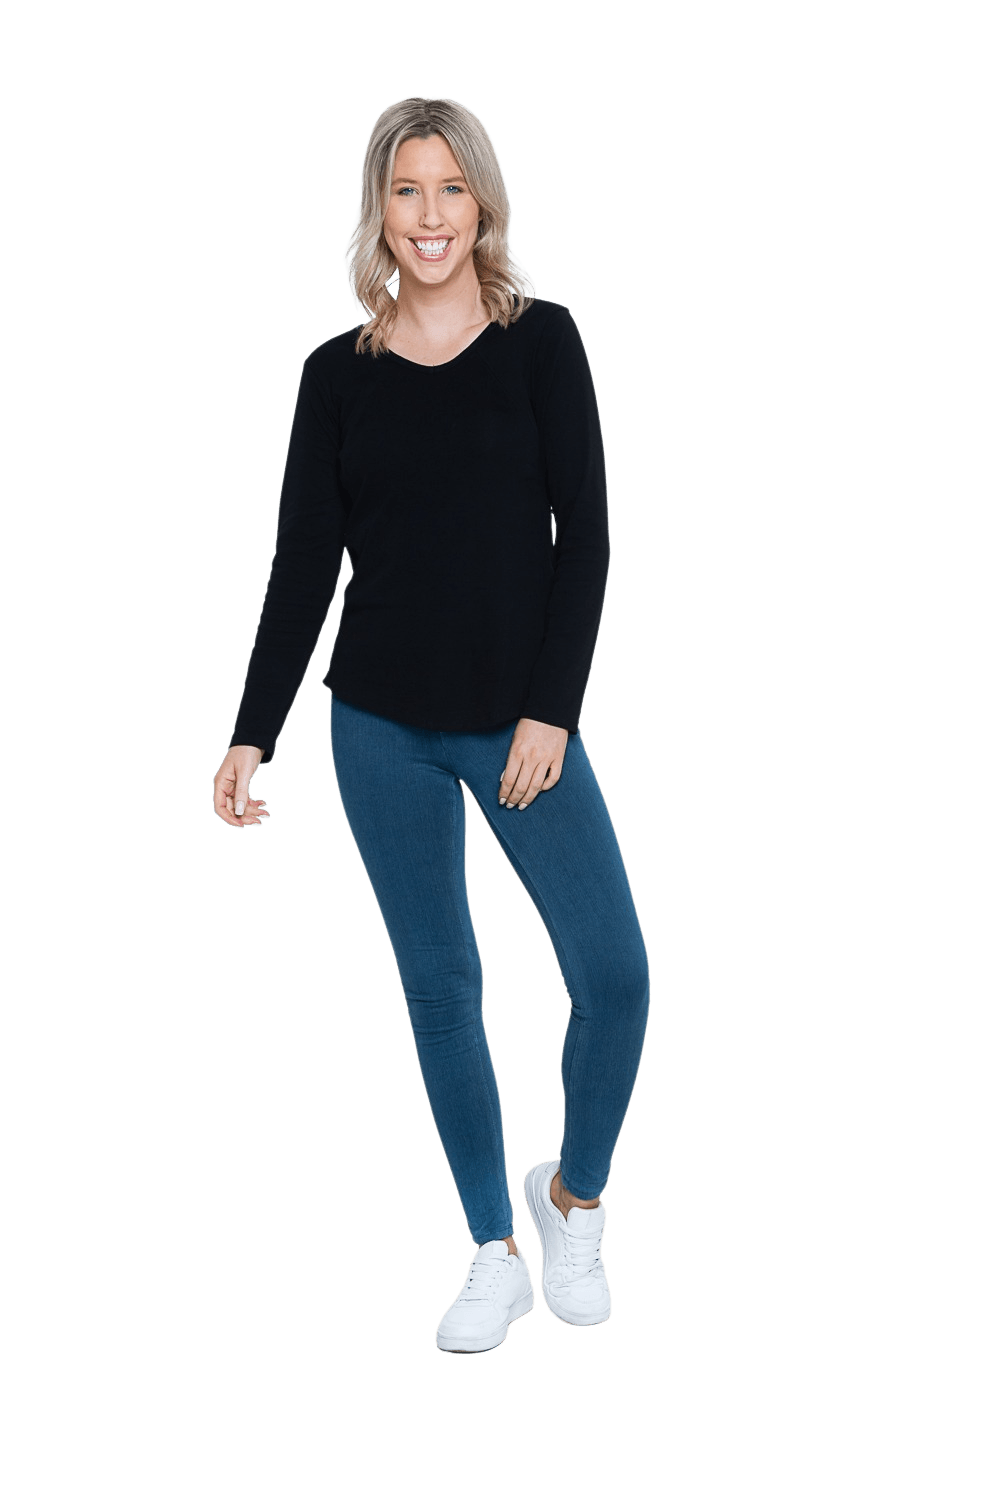 Petite model facing camera wearing black long sleeved top, featuring soft V-neck and a scooped hem. Reese available in sizes 6-26